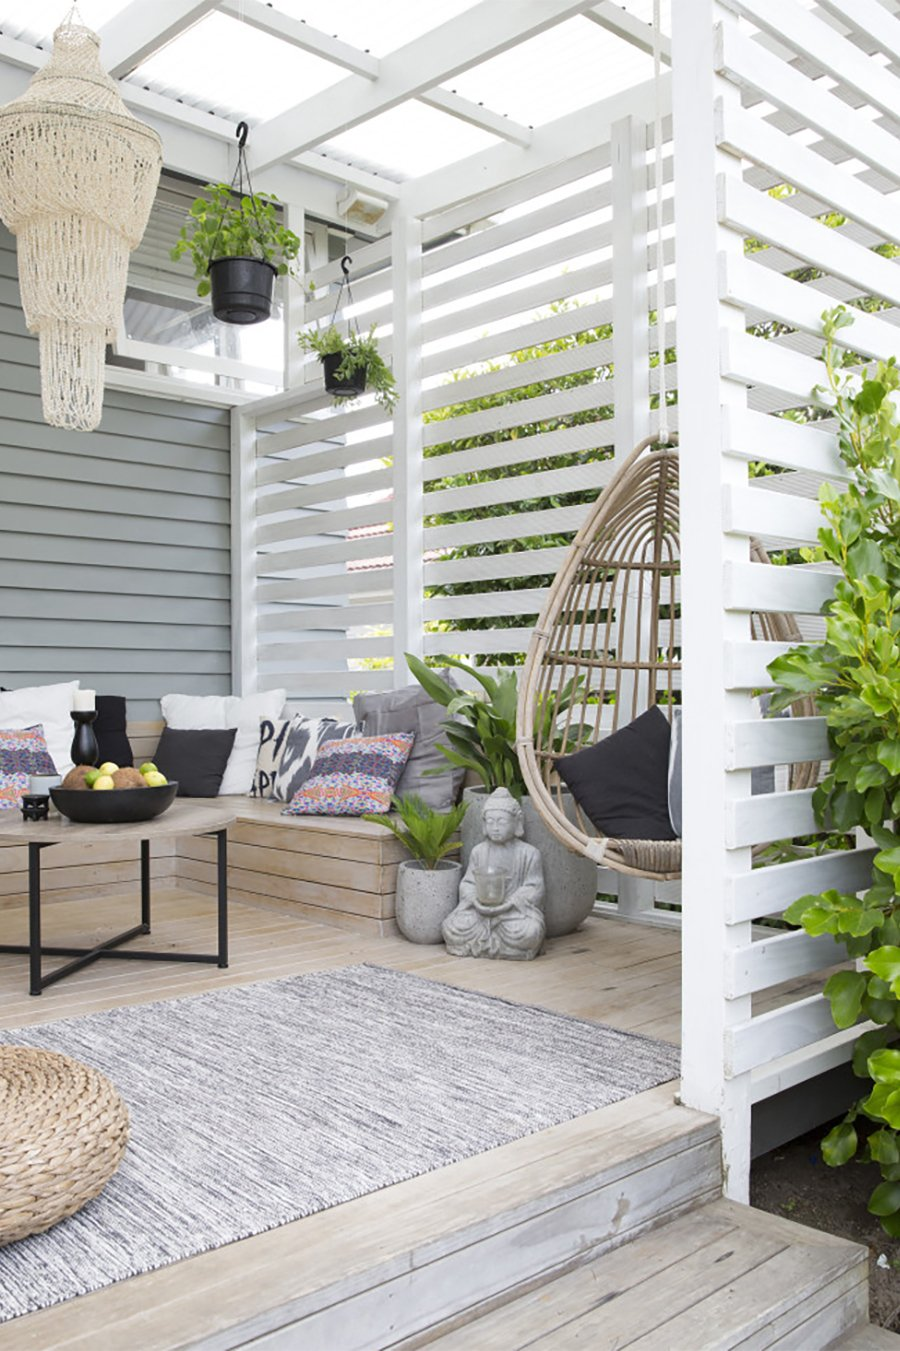 Creative Ways to Decorate Your Deck